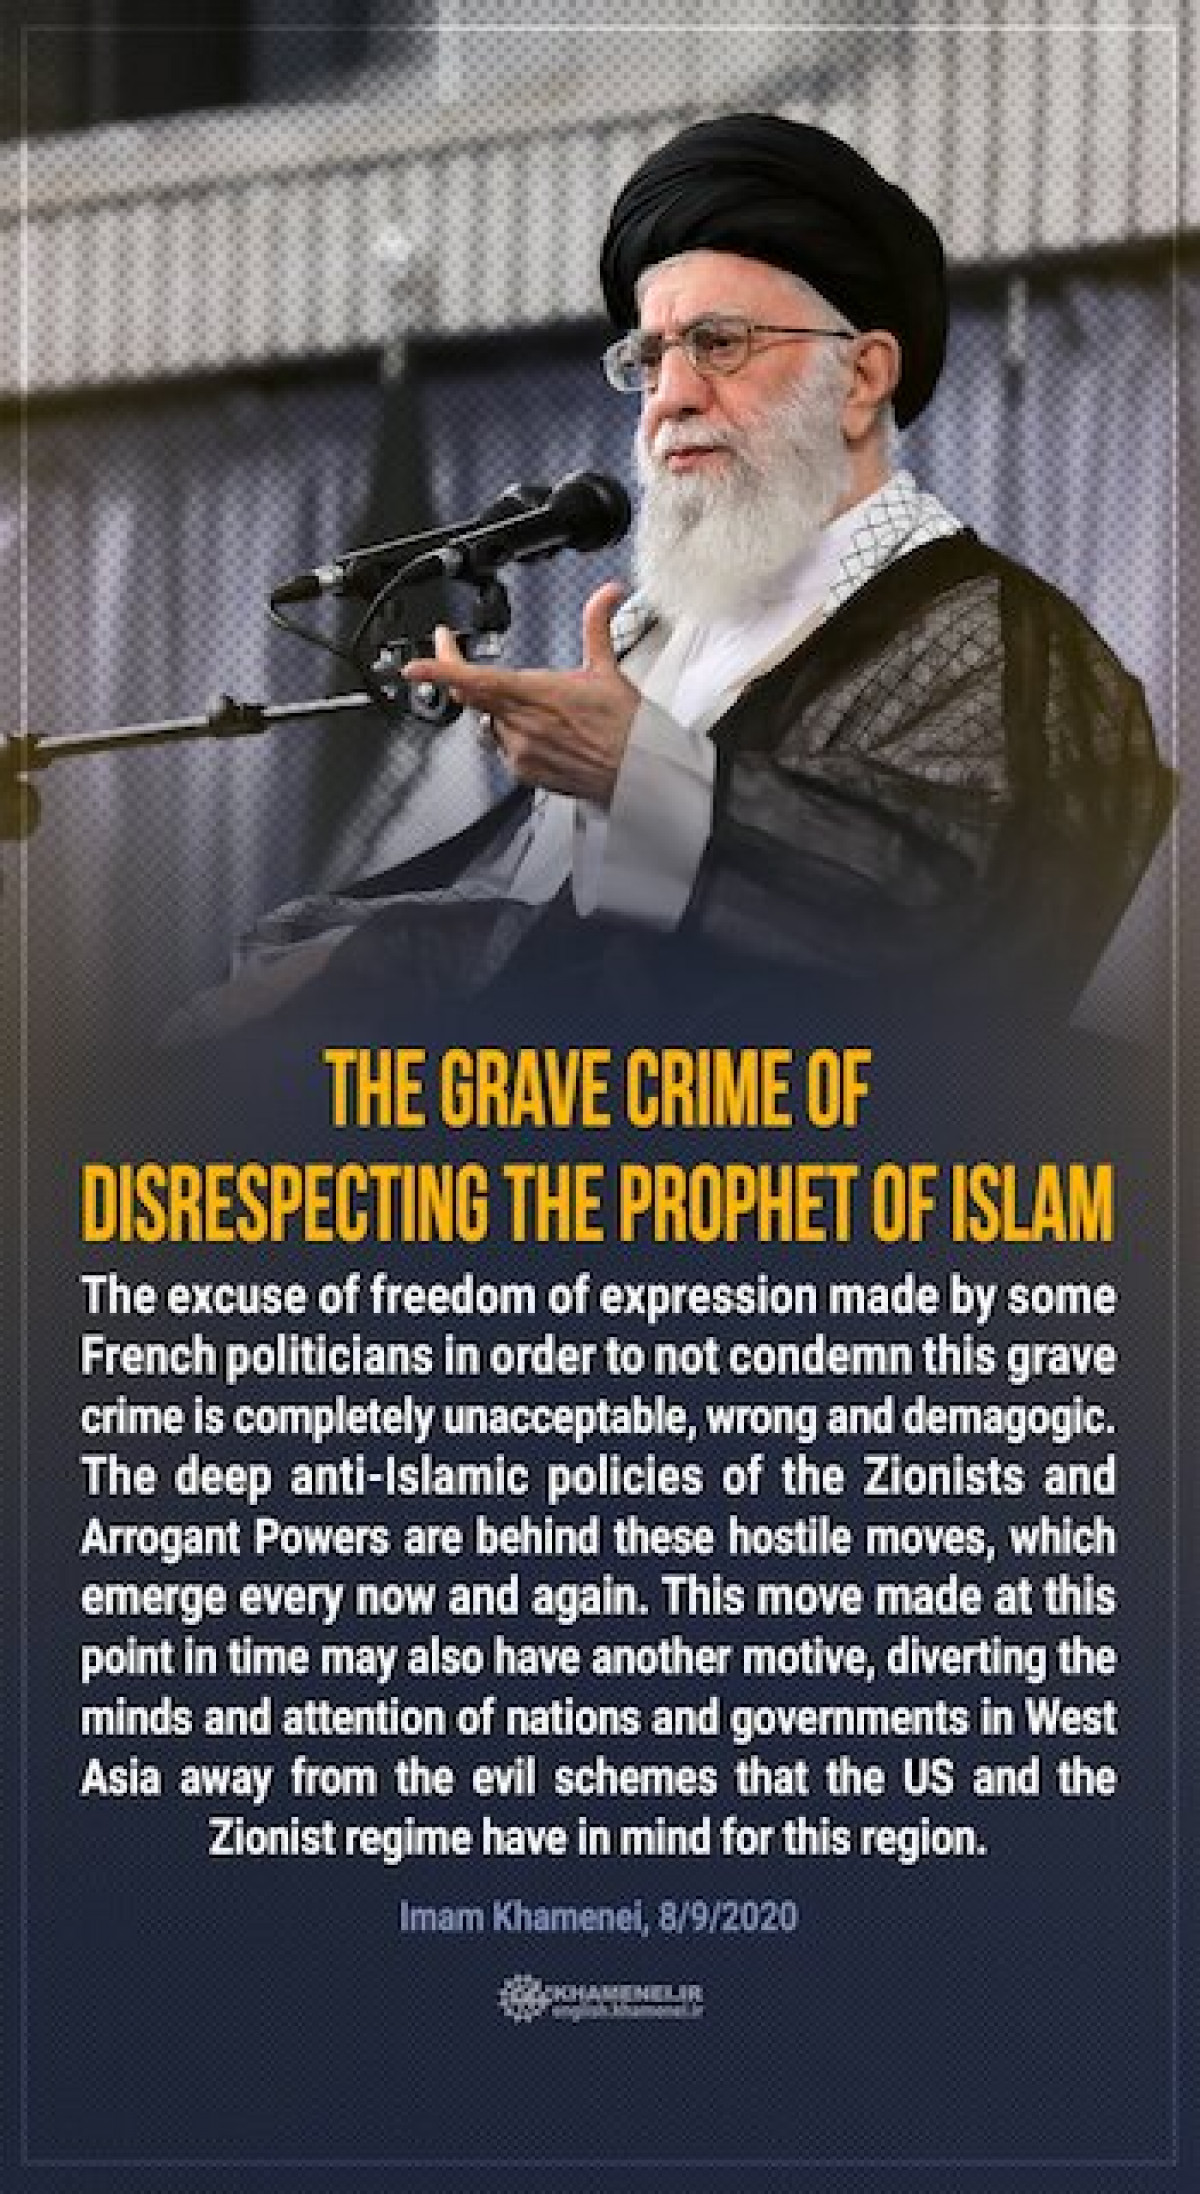 The grave crime of disrespecting the Prophet of Islam